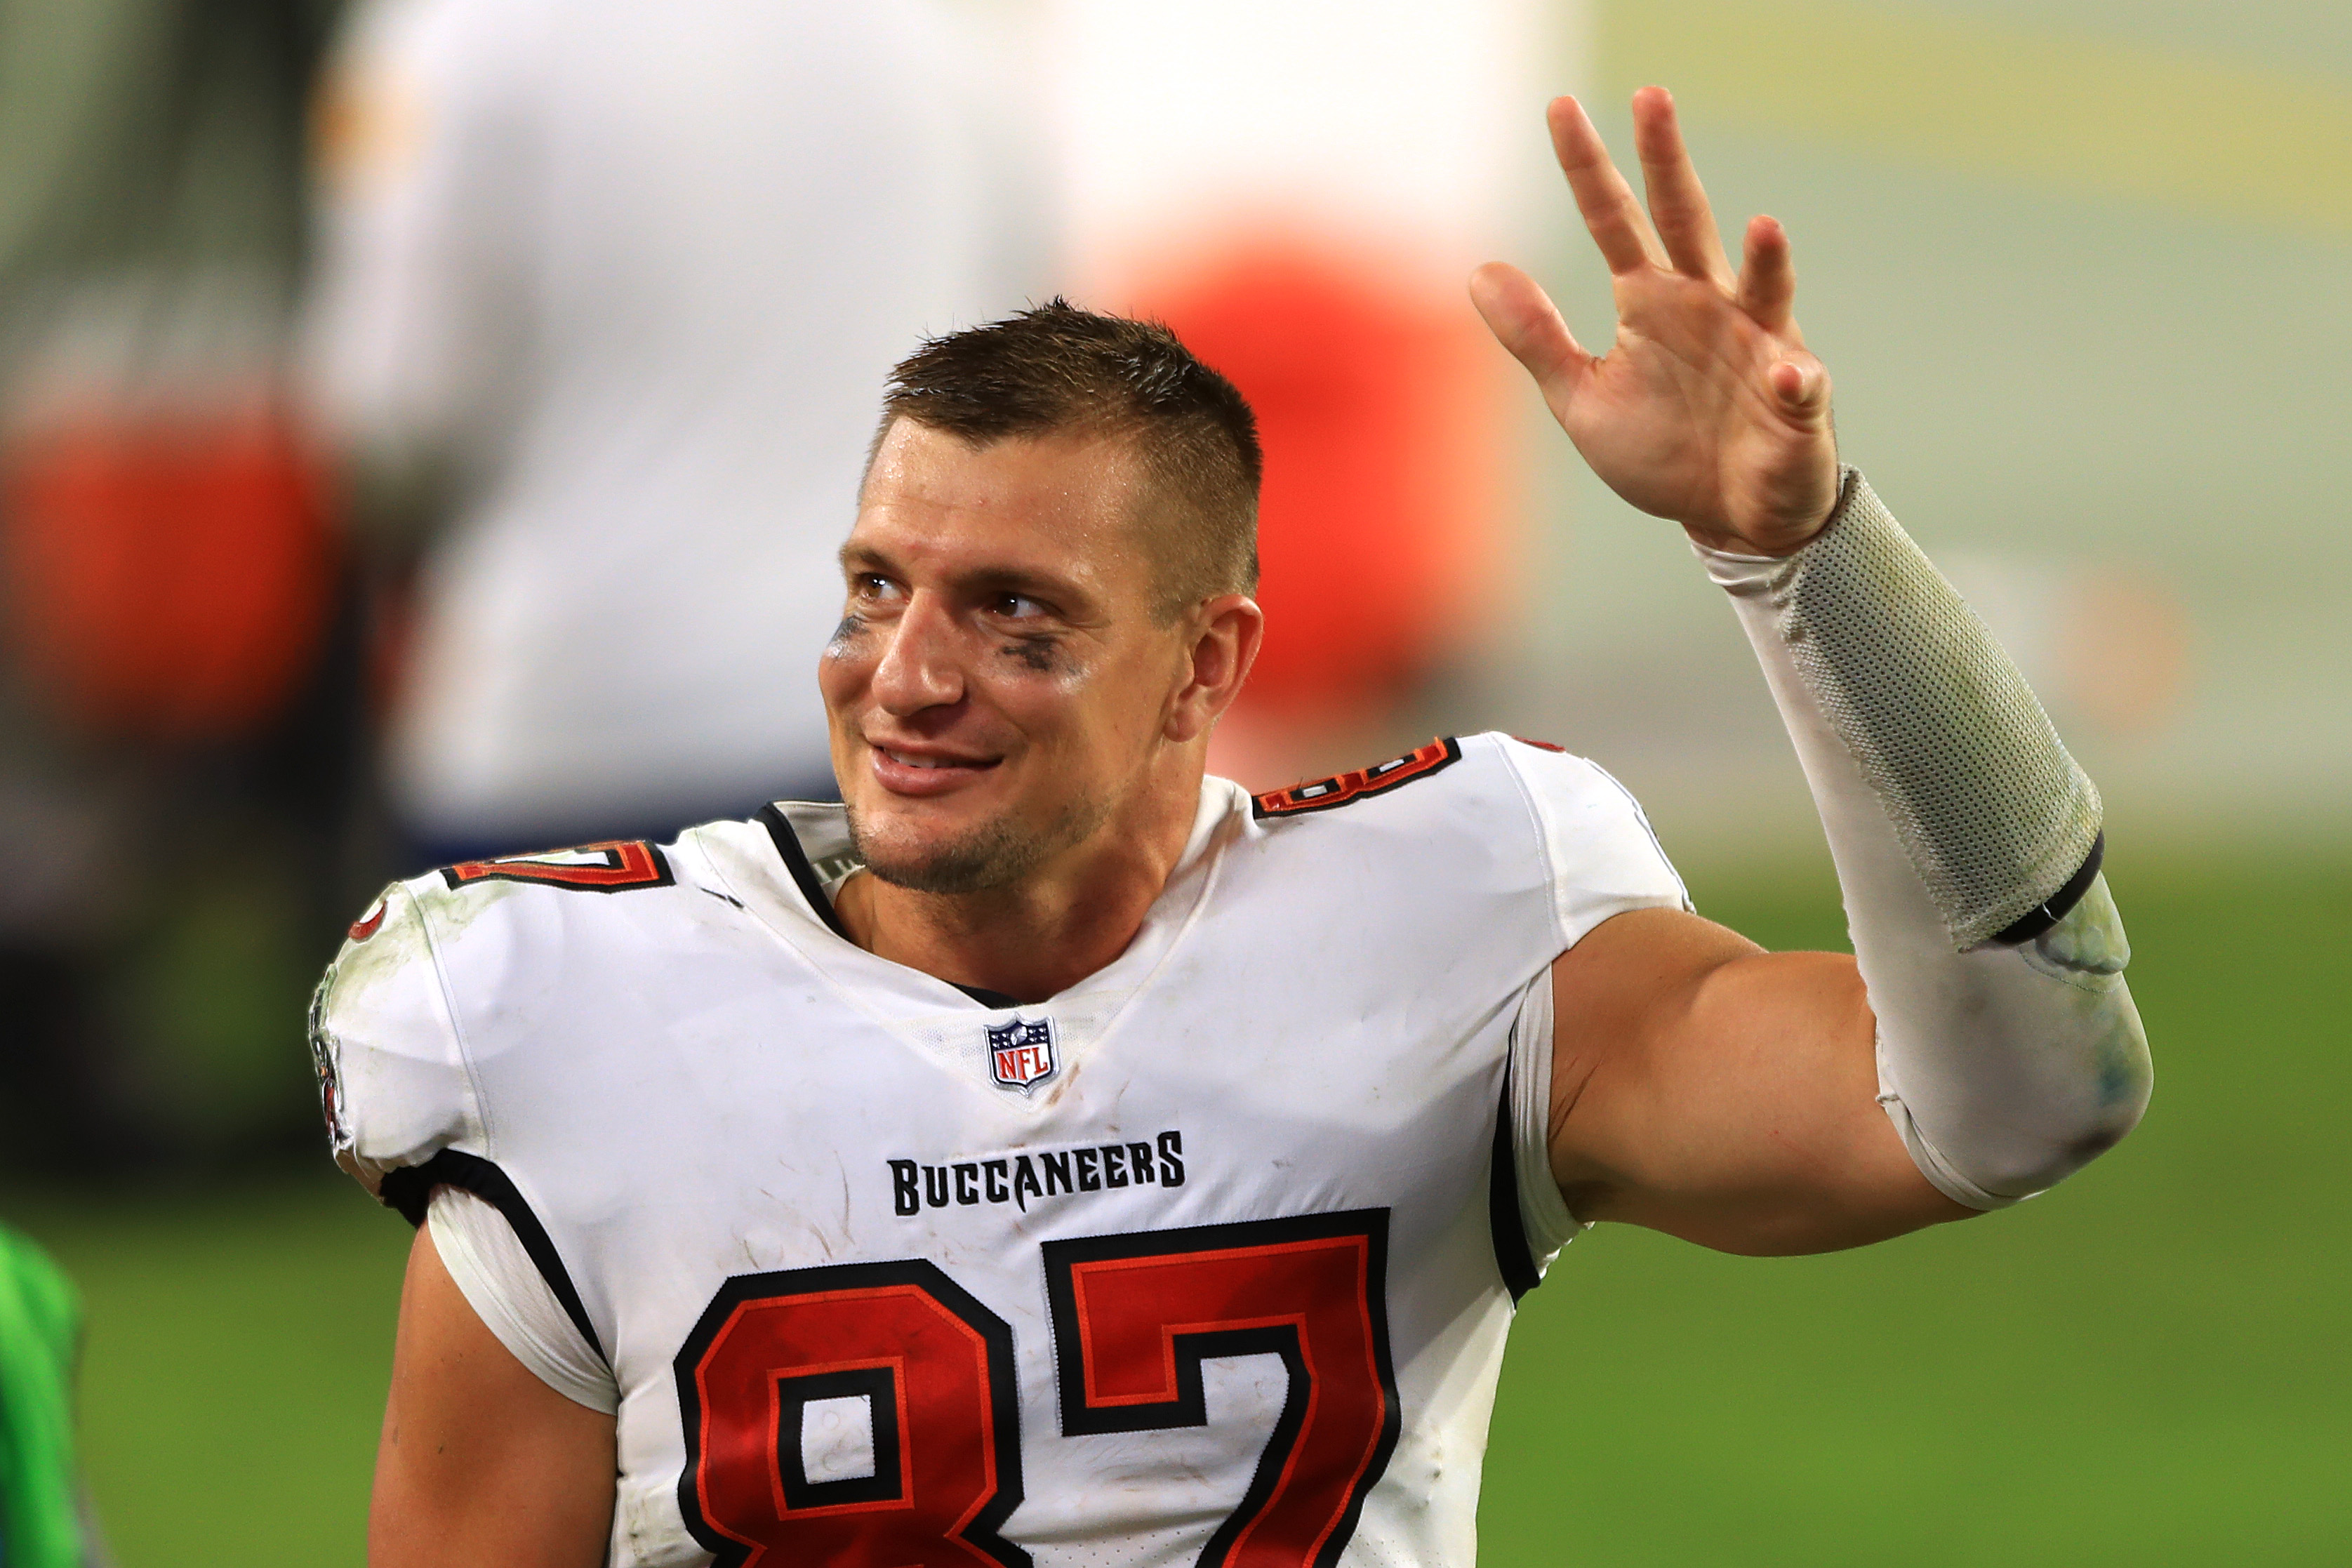 Rob Gronkowski offers bizarre analogy on catching fade passes from Tom Brady.